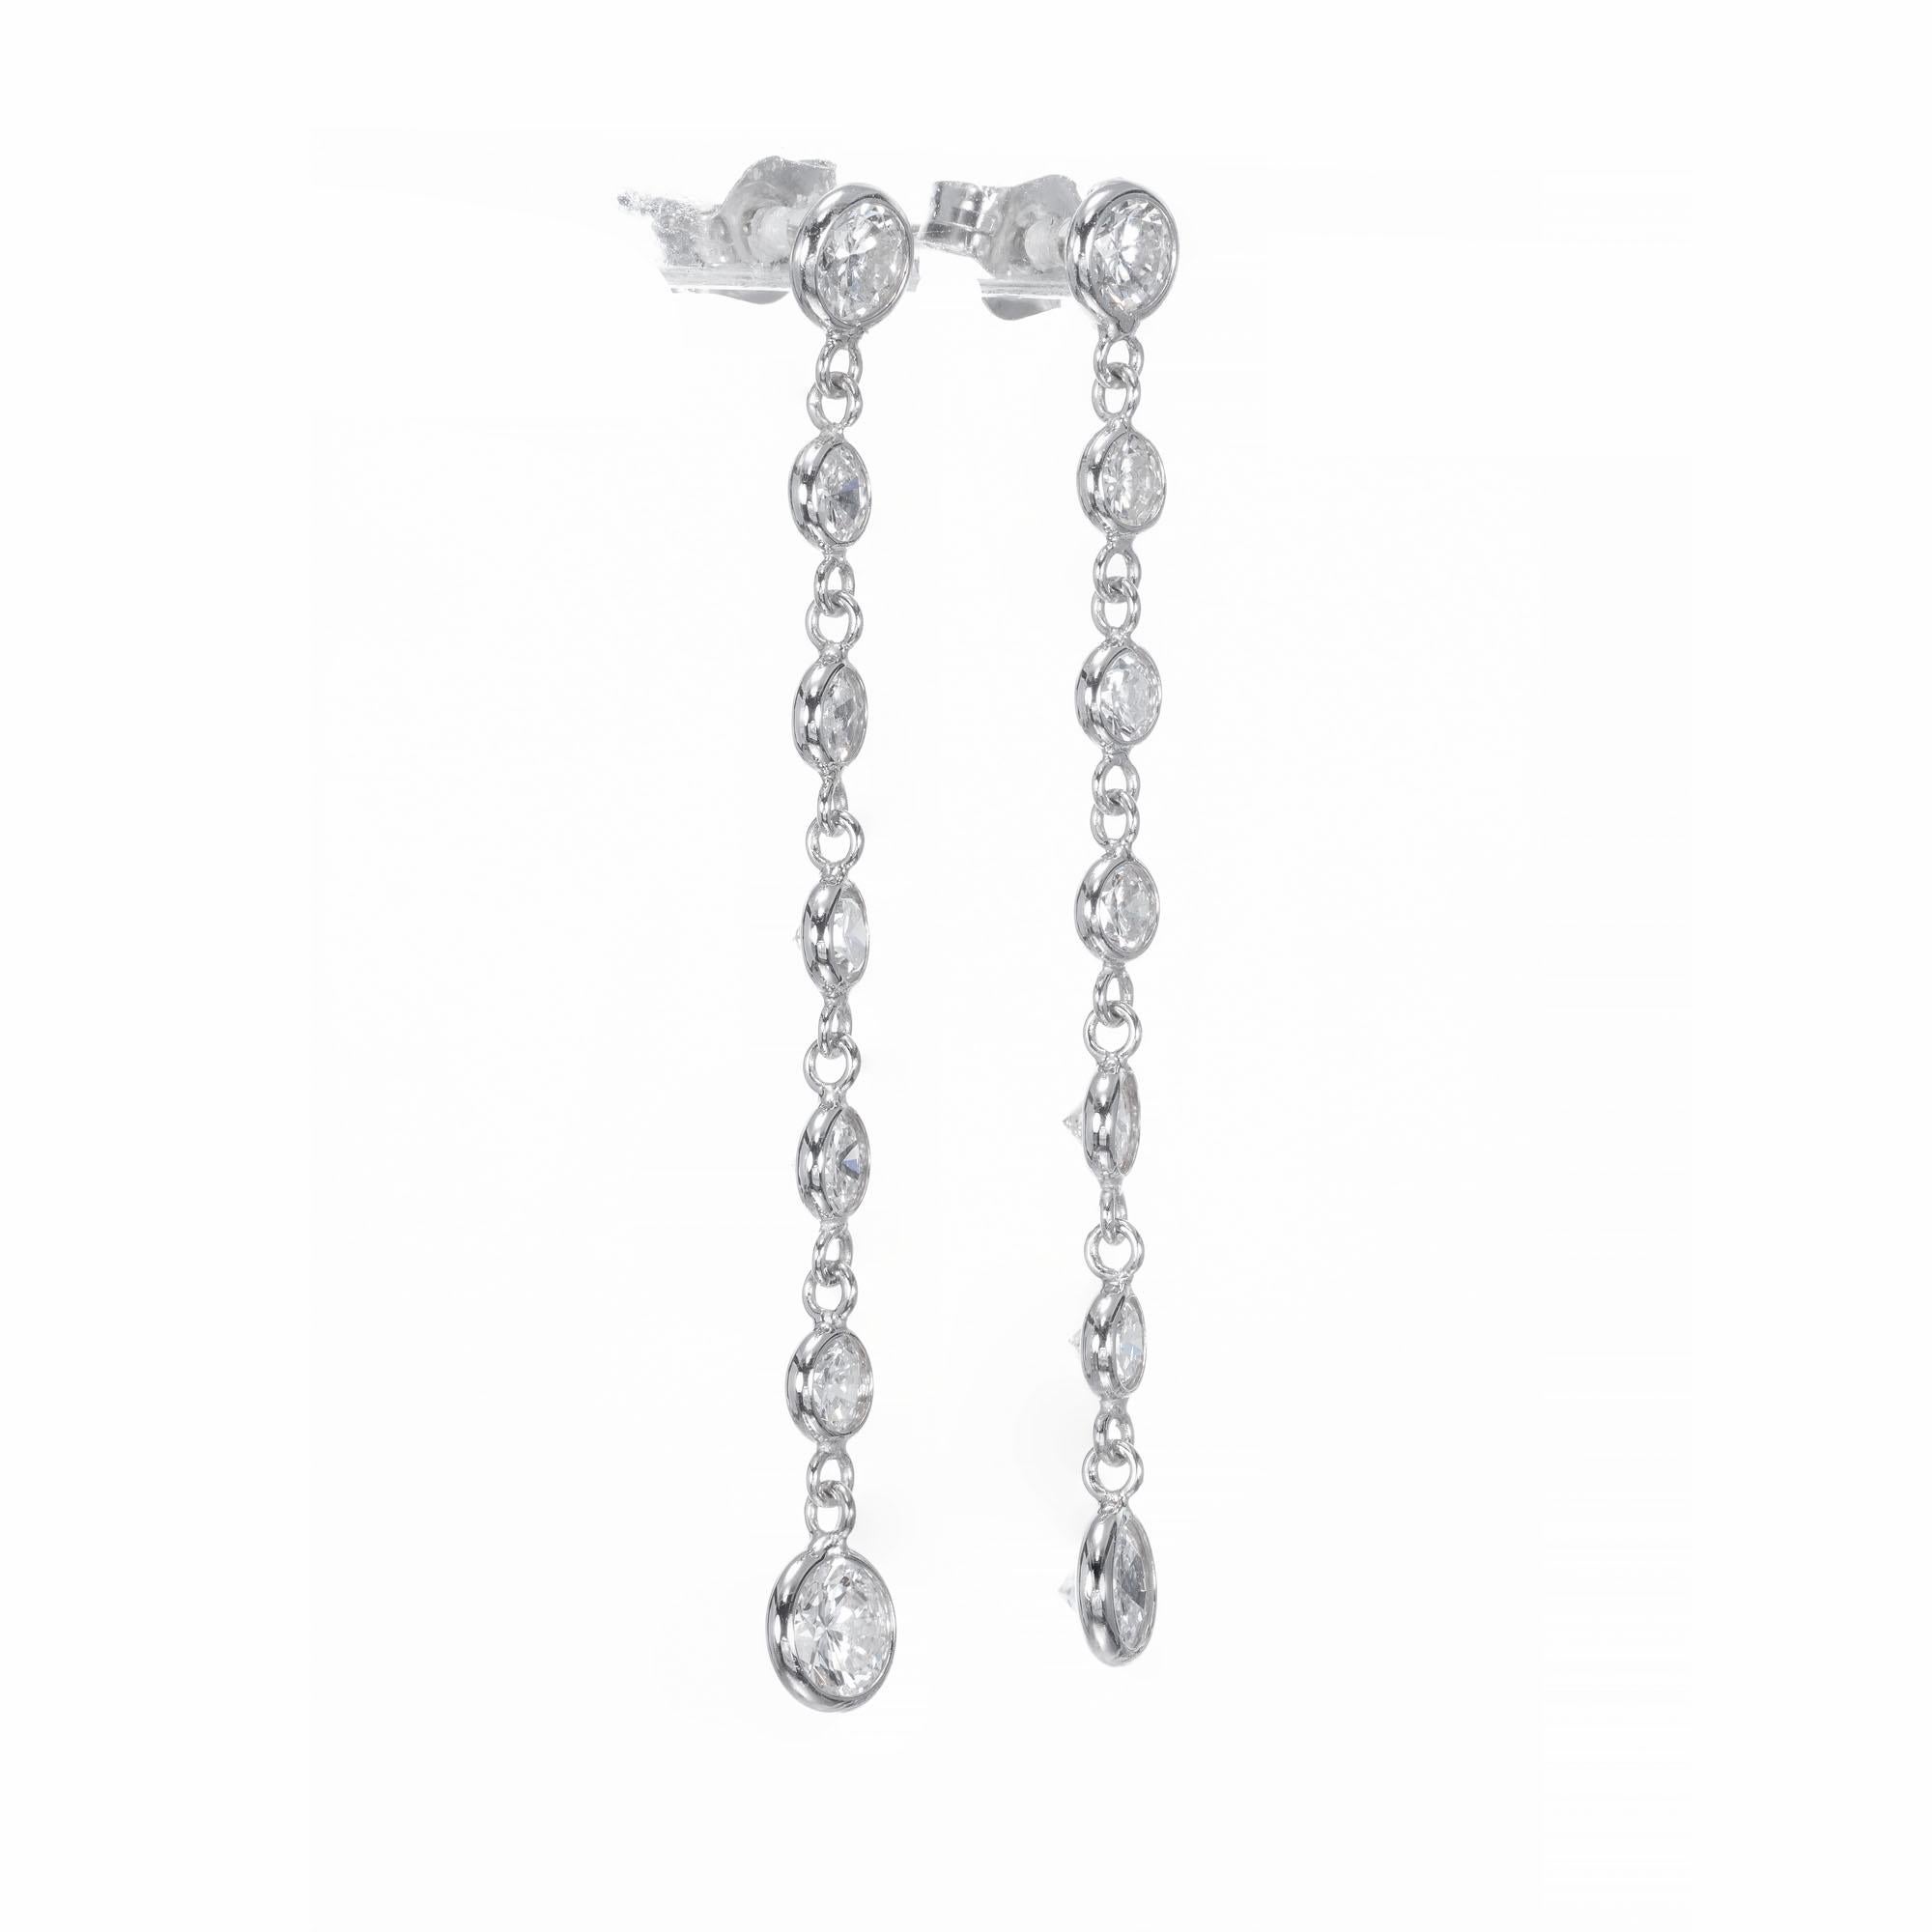 Hand crafted diamond bezel dangle drop earrings. 14 full cut diamonds in 14k white gold.  

14 full cut diamonds, G to H color, VS1 to SI1 clarity, approx. total weight 1.50cts
14k White Gold
Stamped: 14k
80 grams
Top to bottom: 1.56 inches or